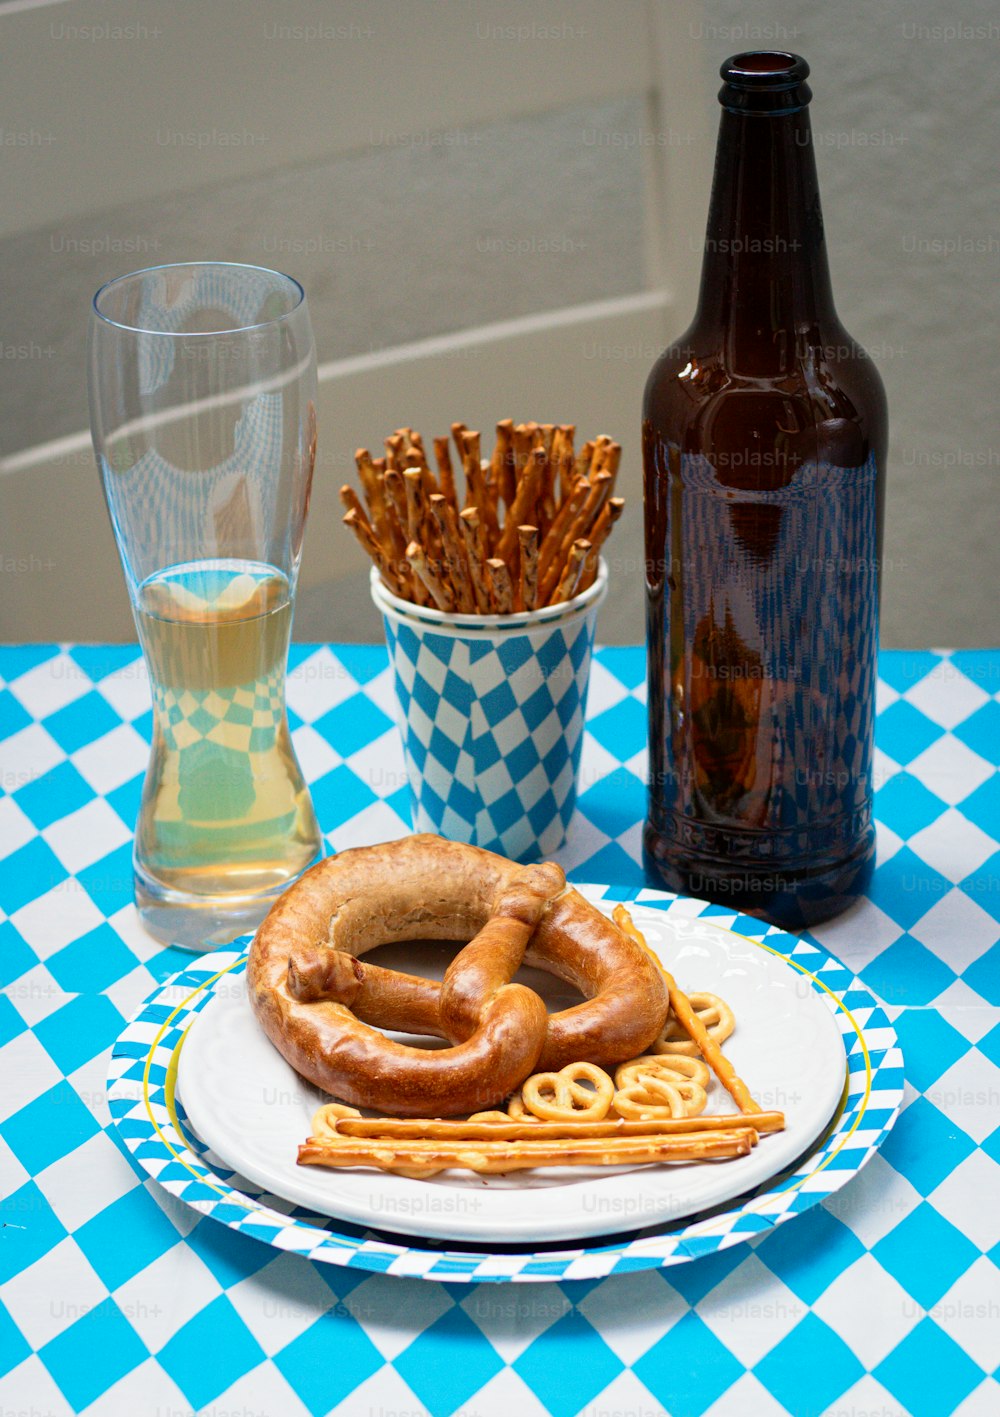 a plate with a pretzel on it next to a glass of beer